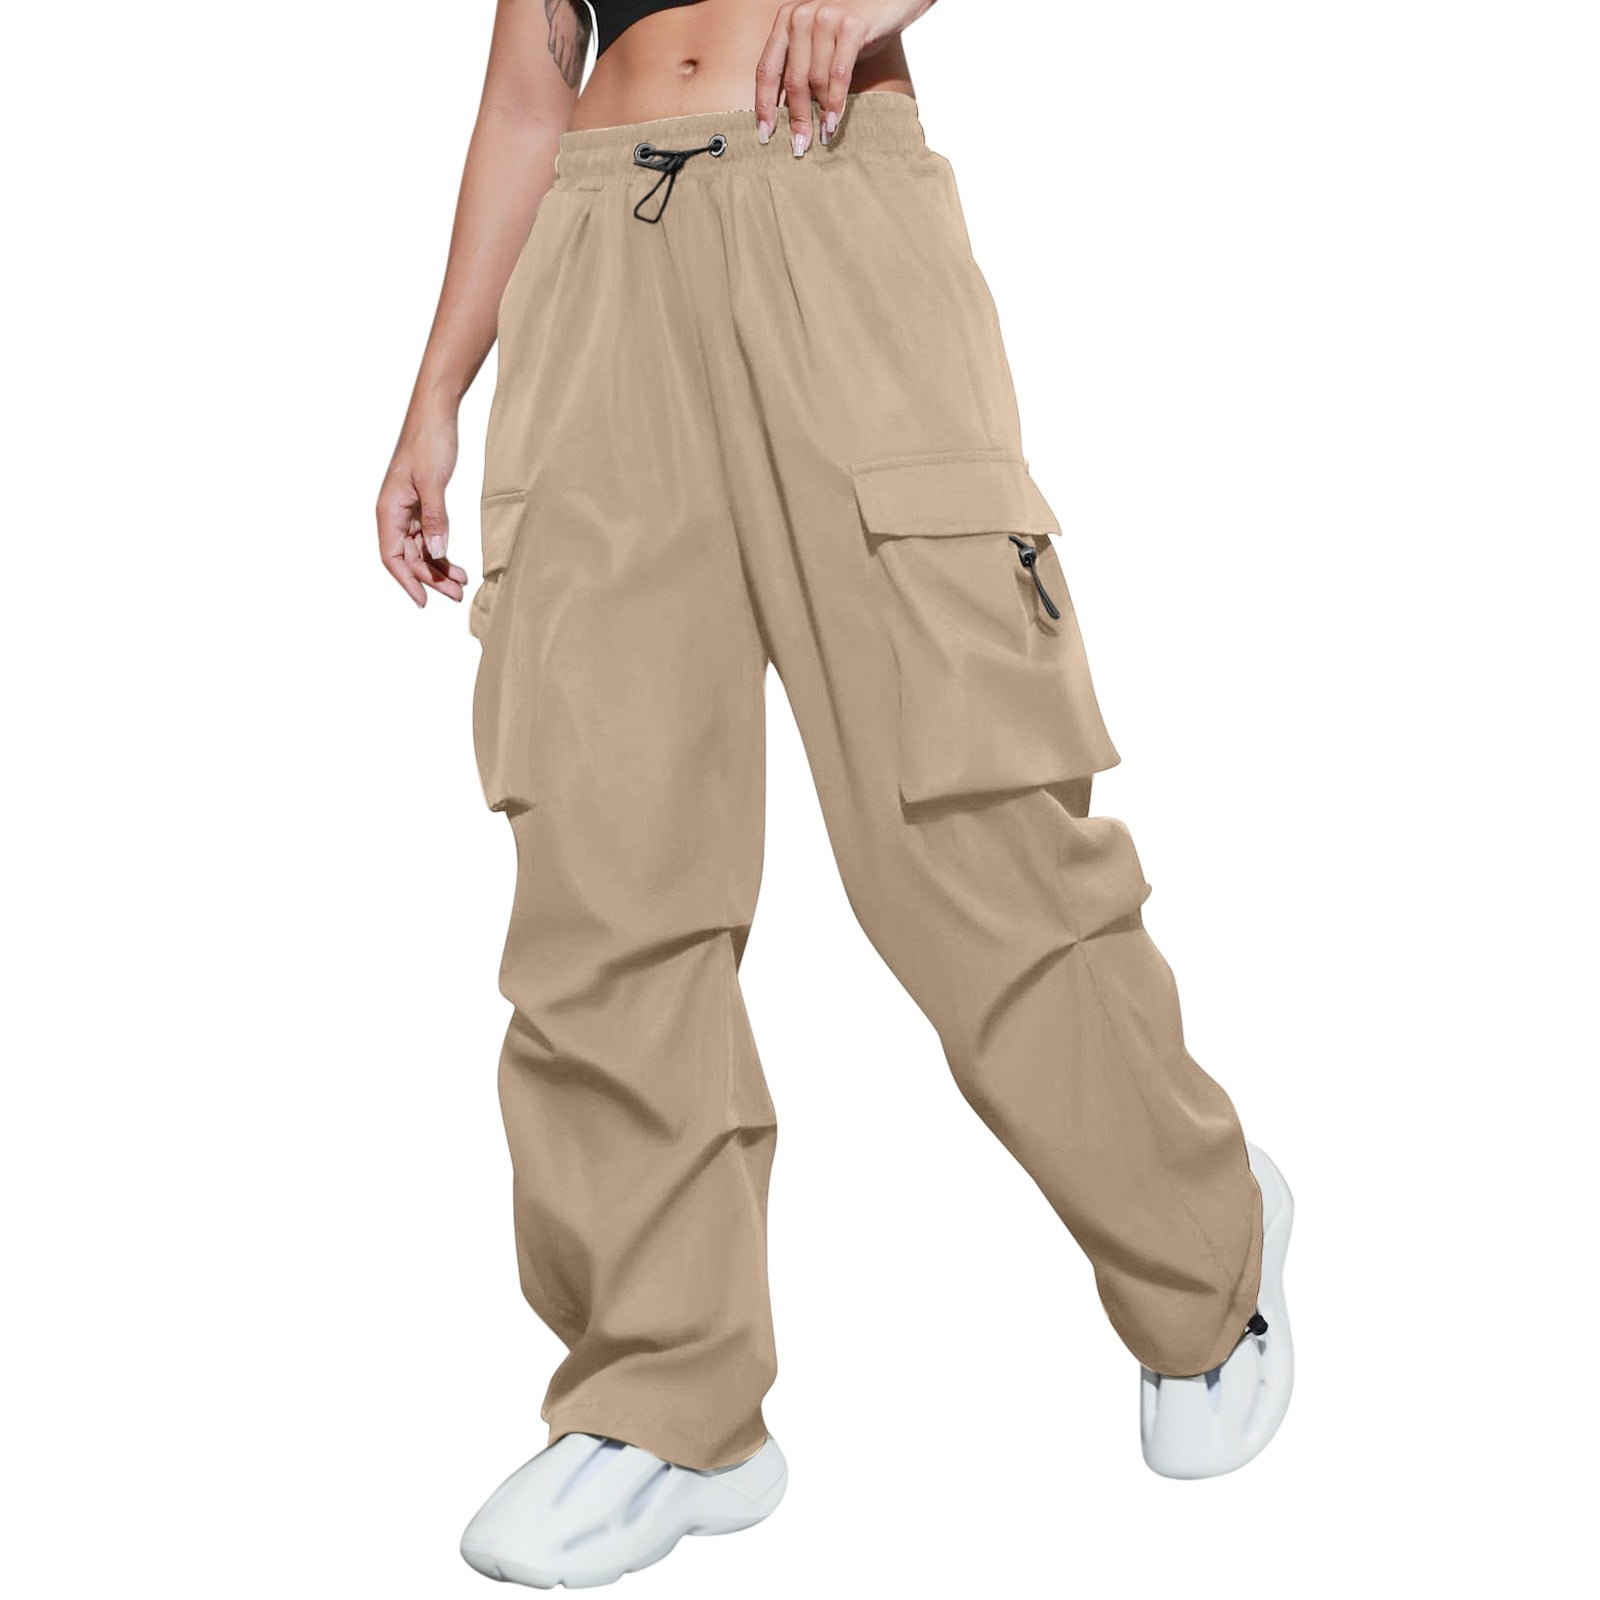 Tdoqot Women's Cargo Pants- with Pockets High weight Casual